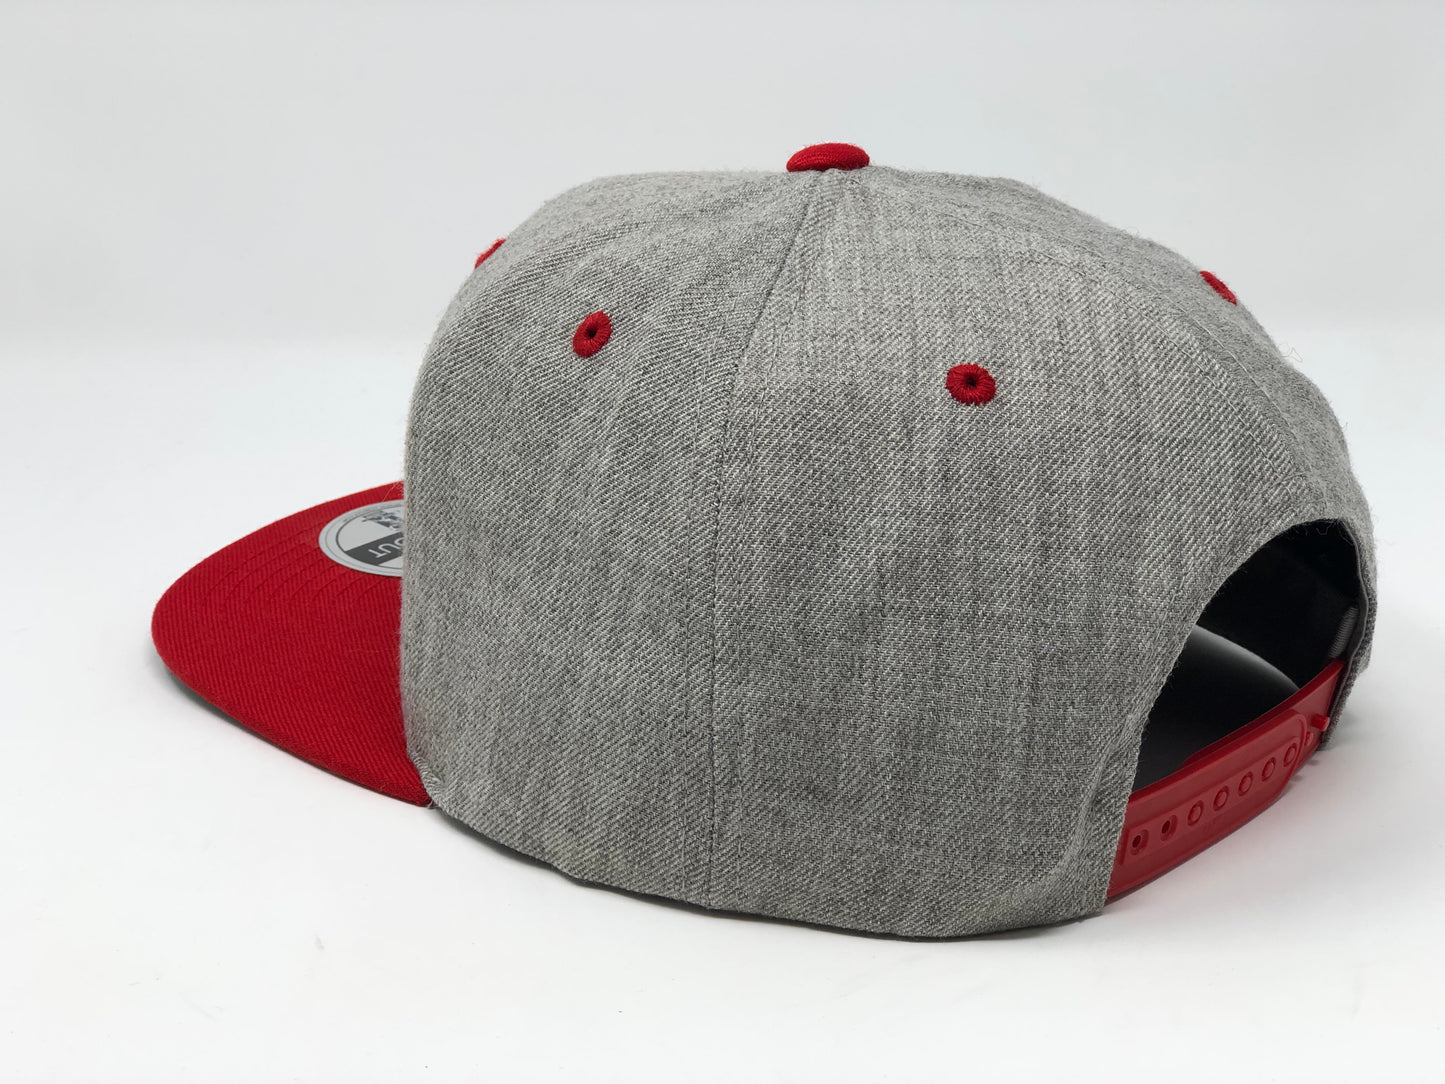 Mike Trout 27 Hat - Grey/Red Snapback